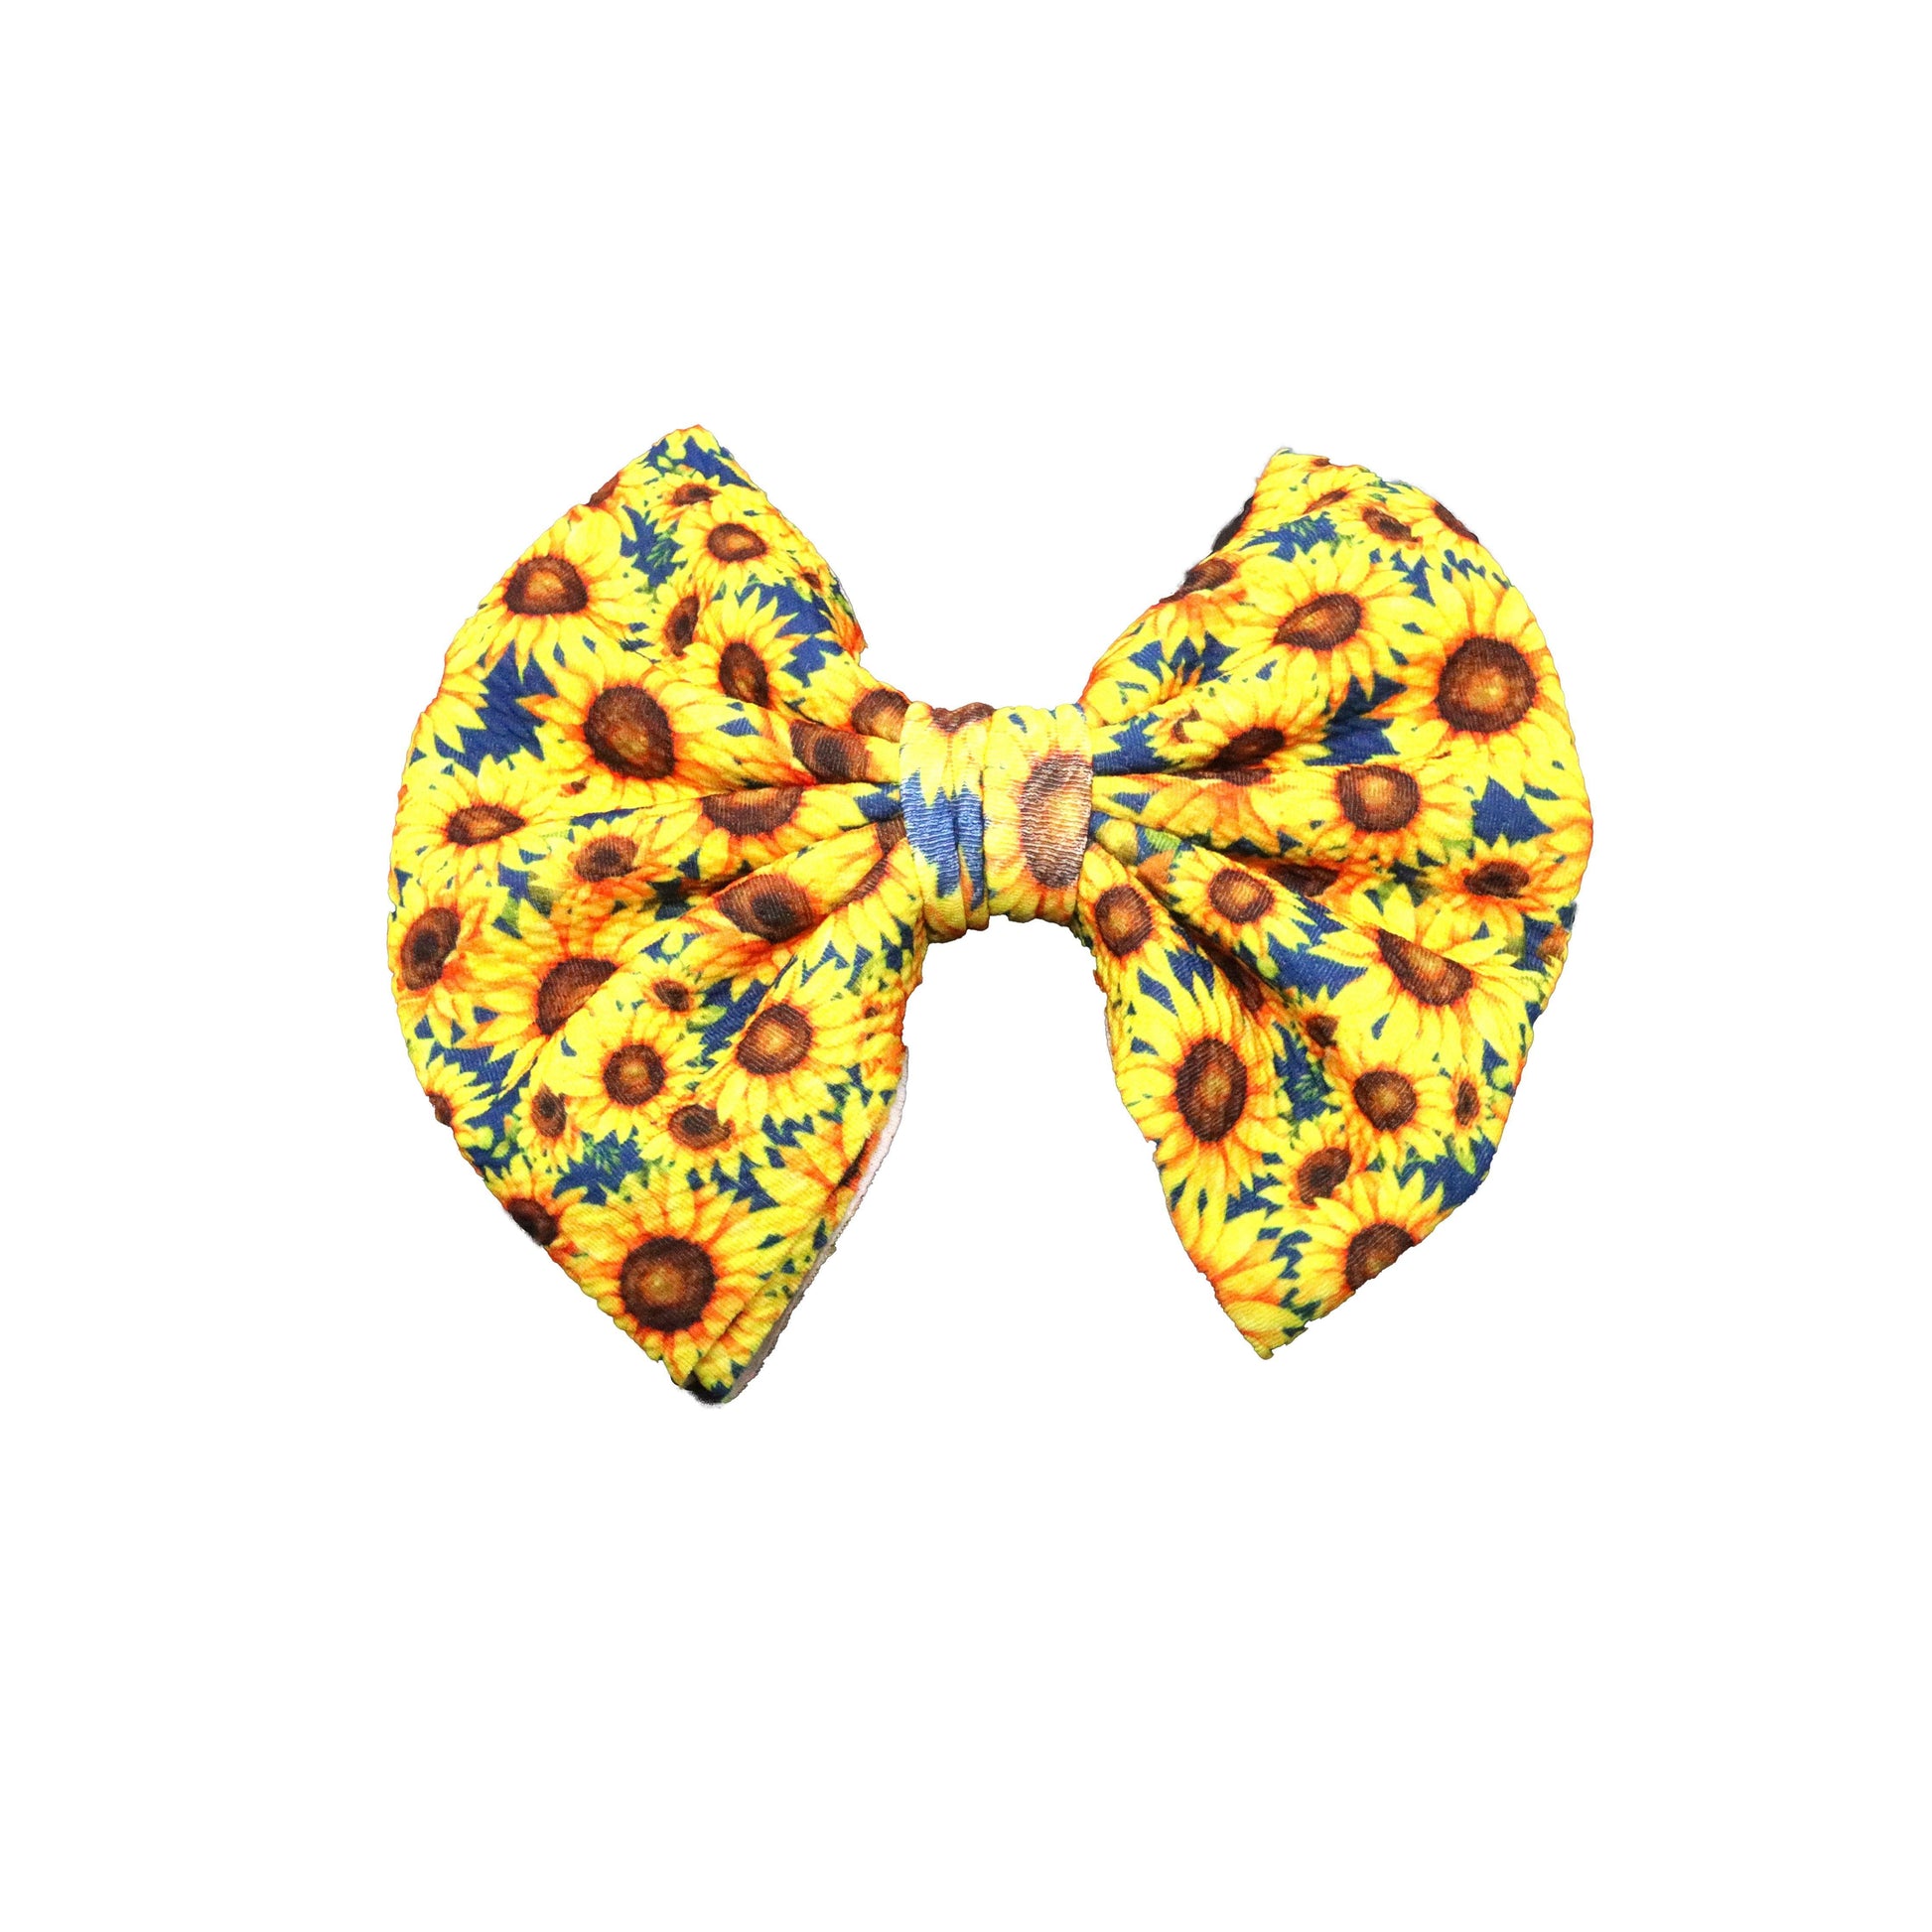 7", Bow, Hair Bow, Sunflower Fields, Fabric Bow, New Product - 04OCT2020